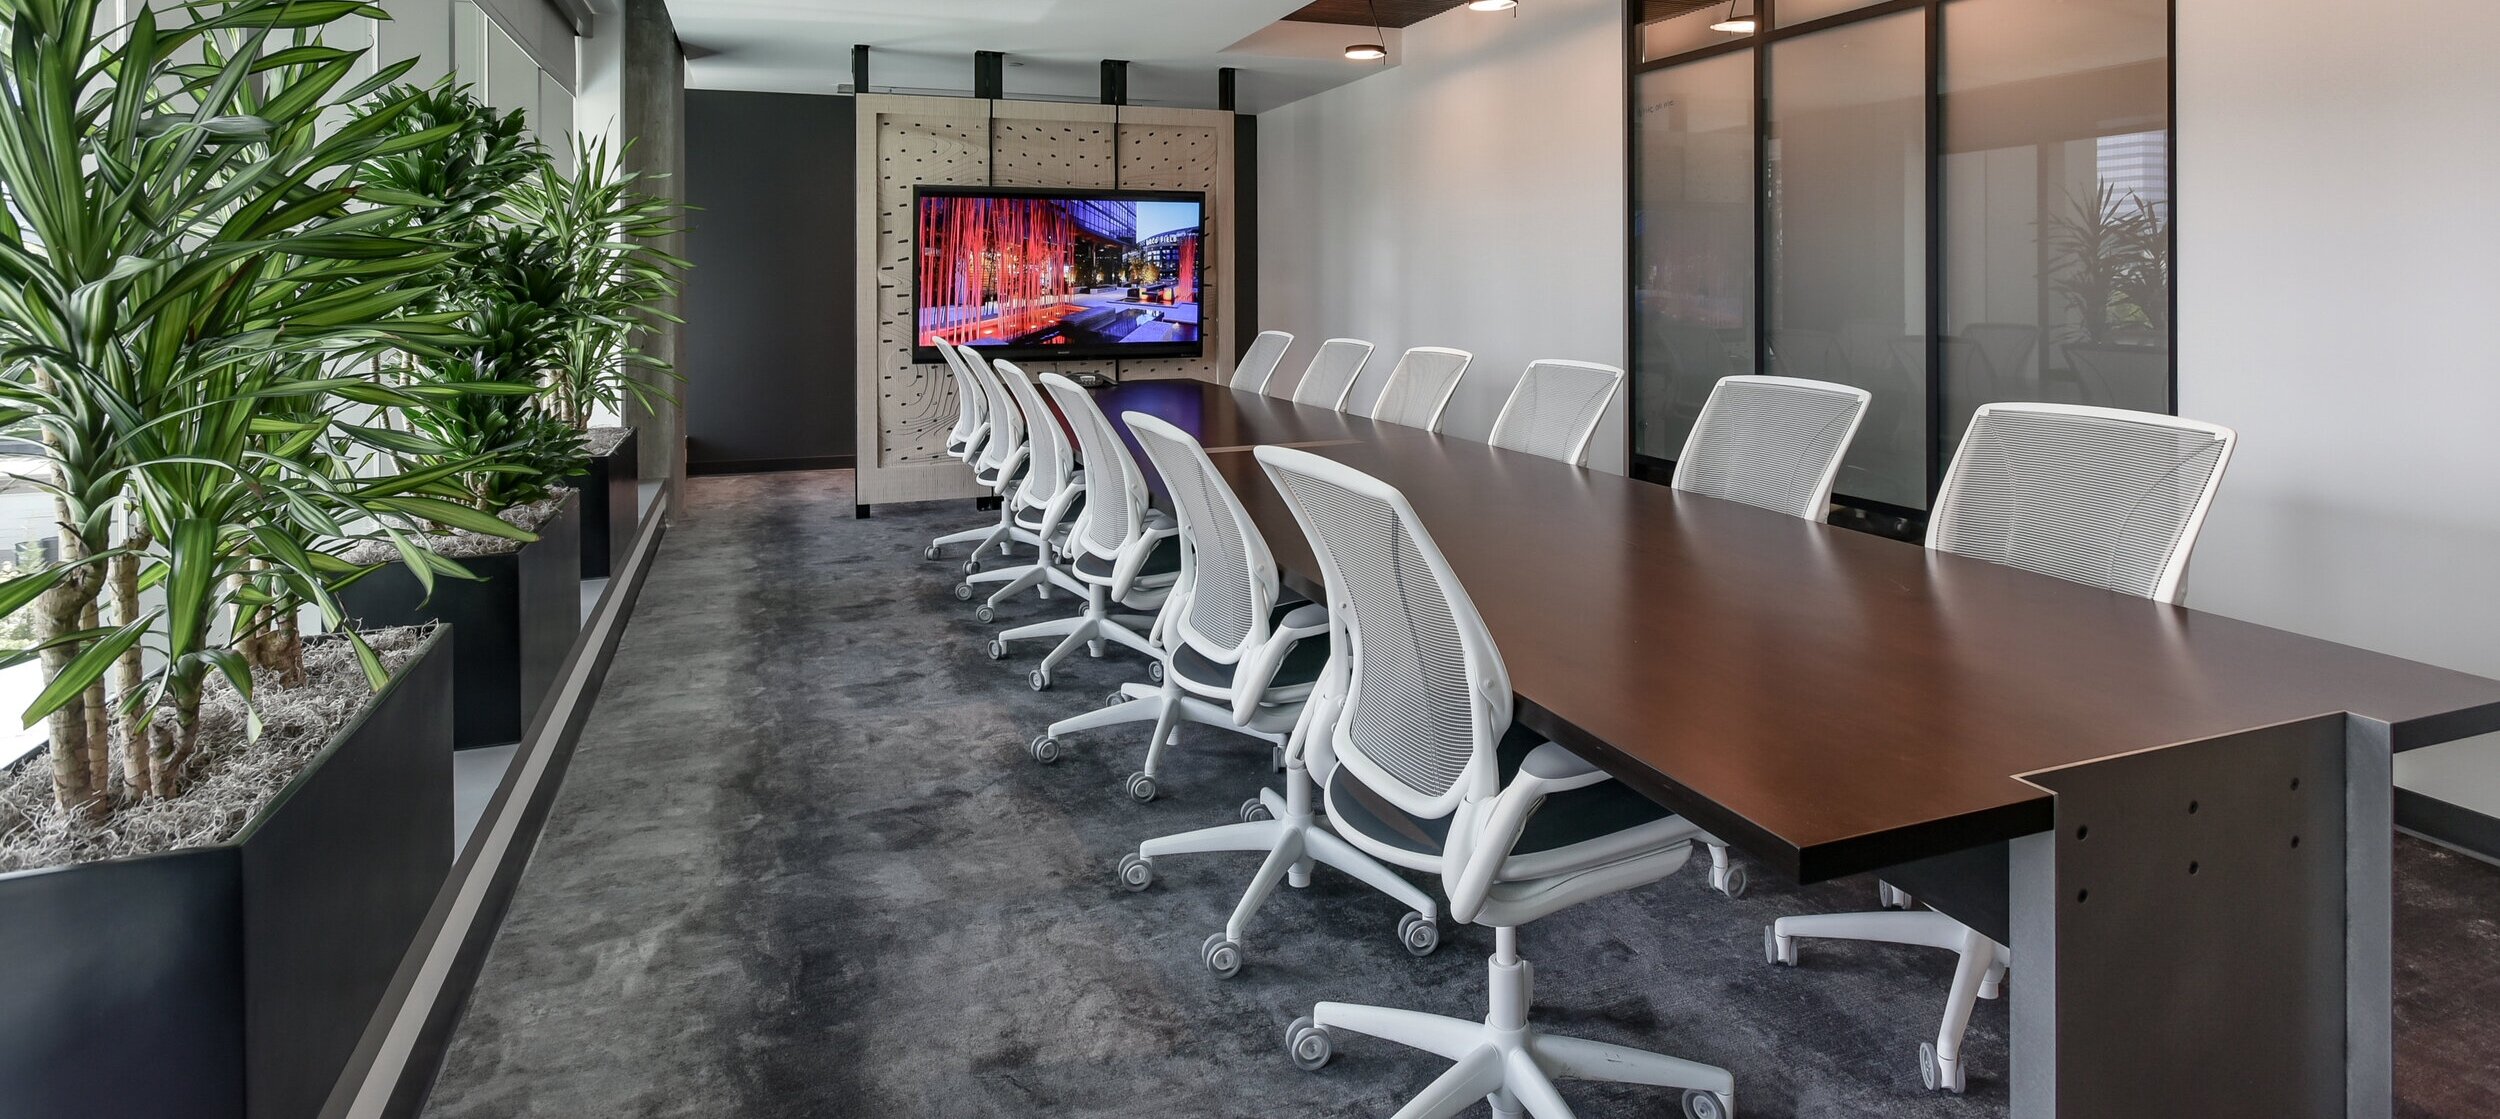 custom conference table with steel legs at the ends gives users plenty of leg room